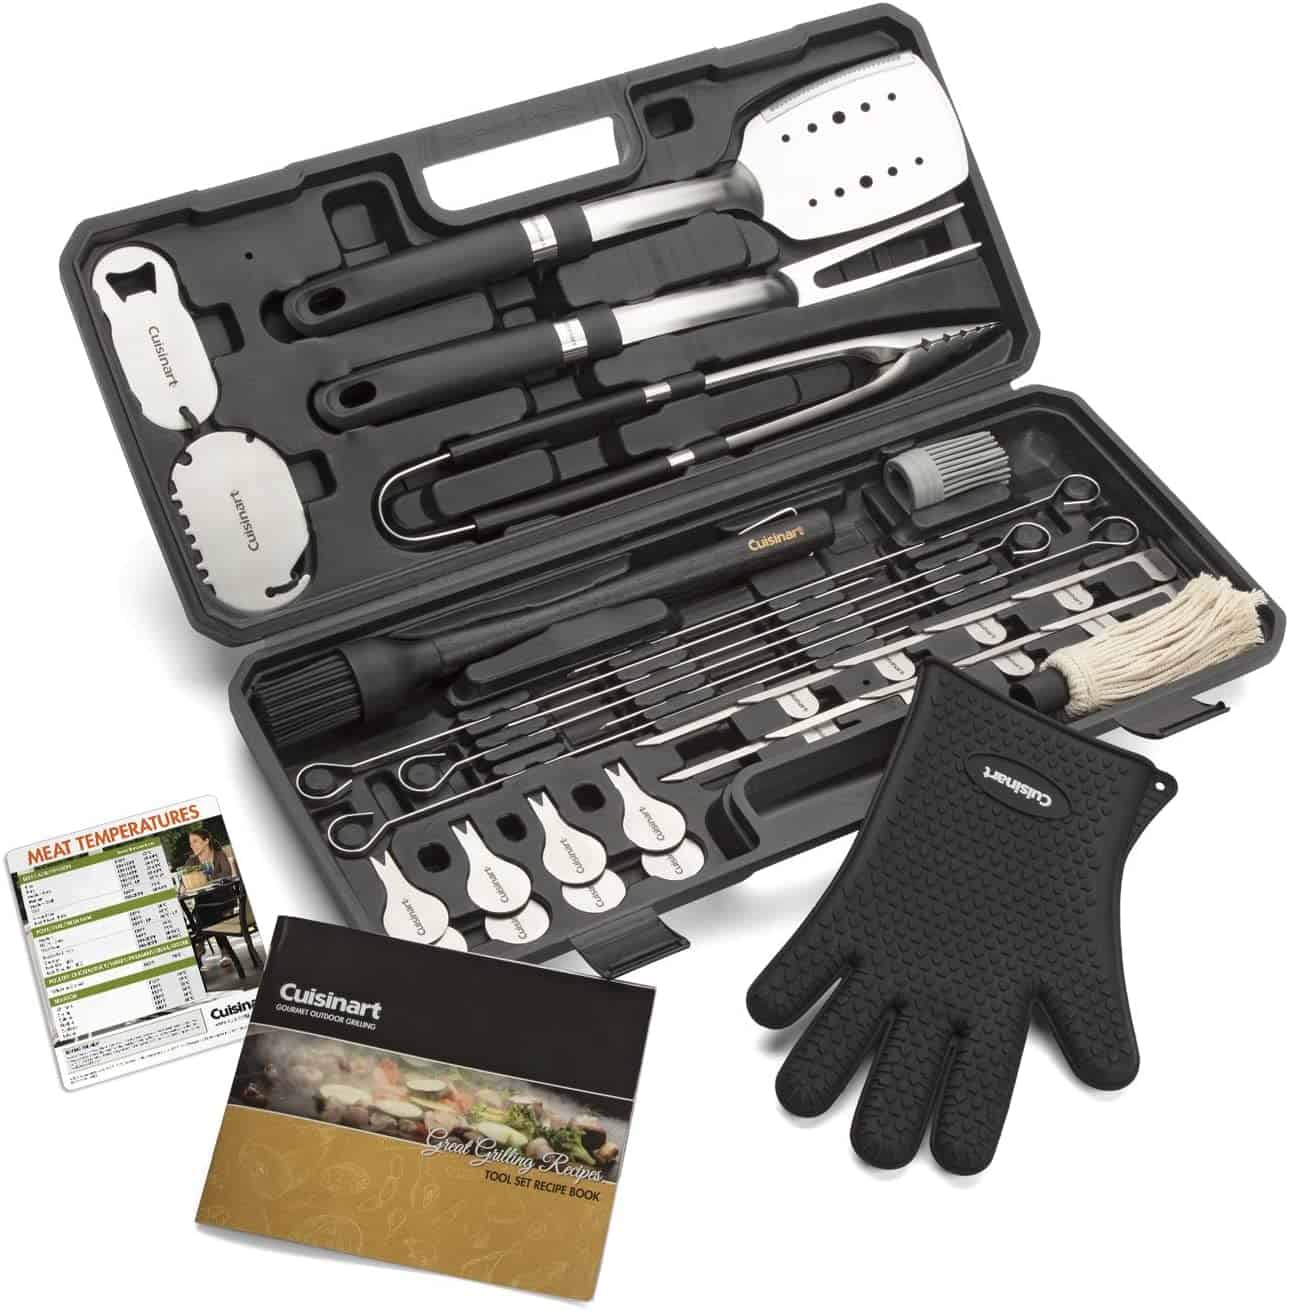 Grill tool set with the best additional accessories- Cuisinart CGS-8036 Grill BBQ Set